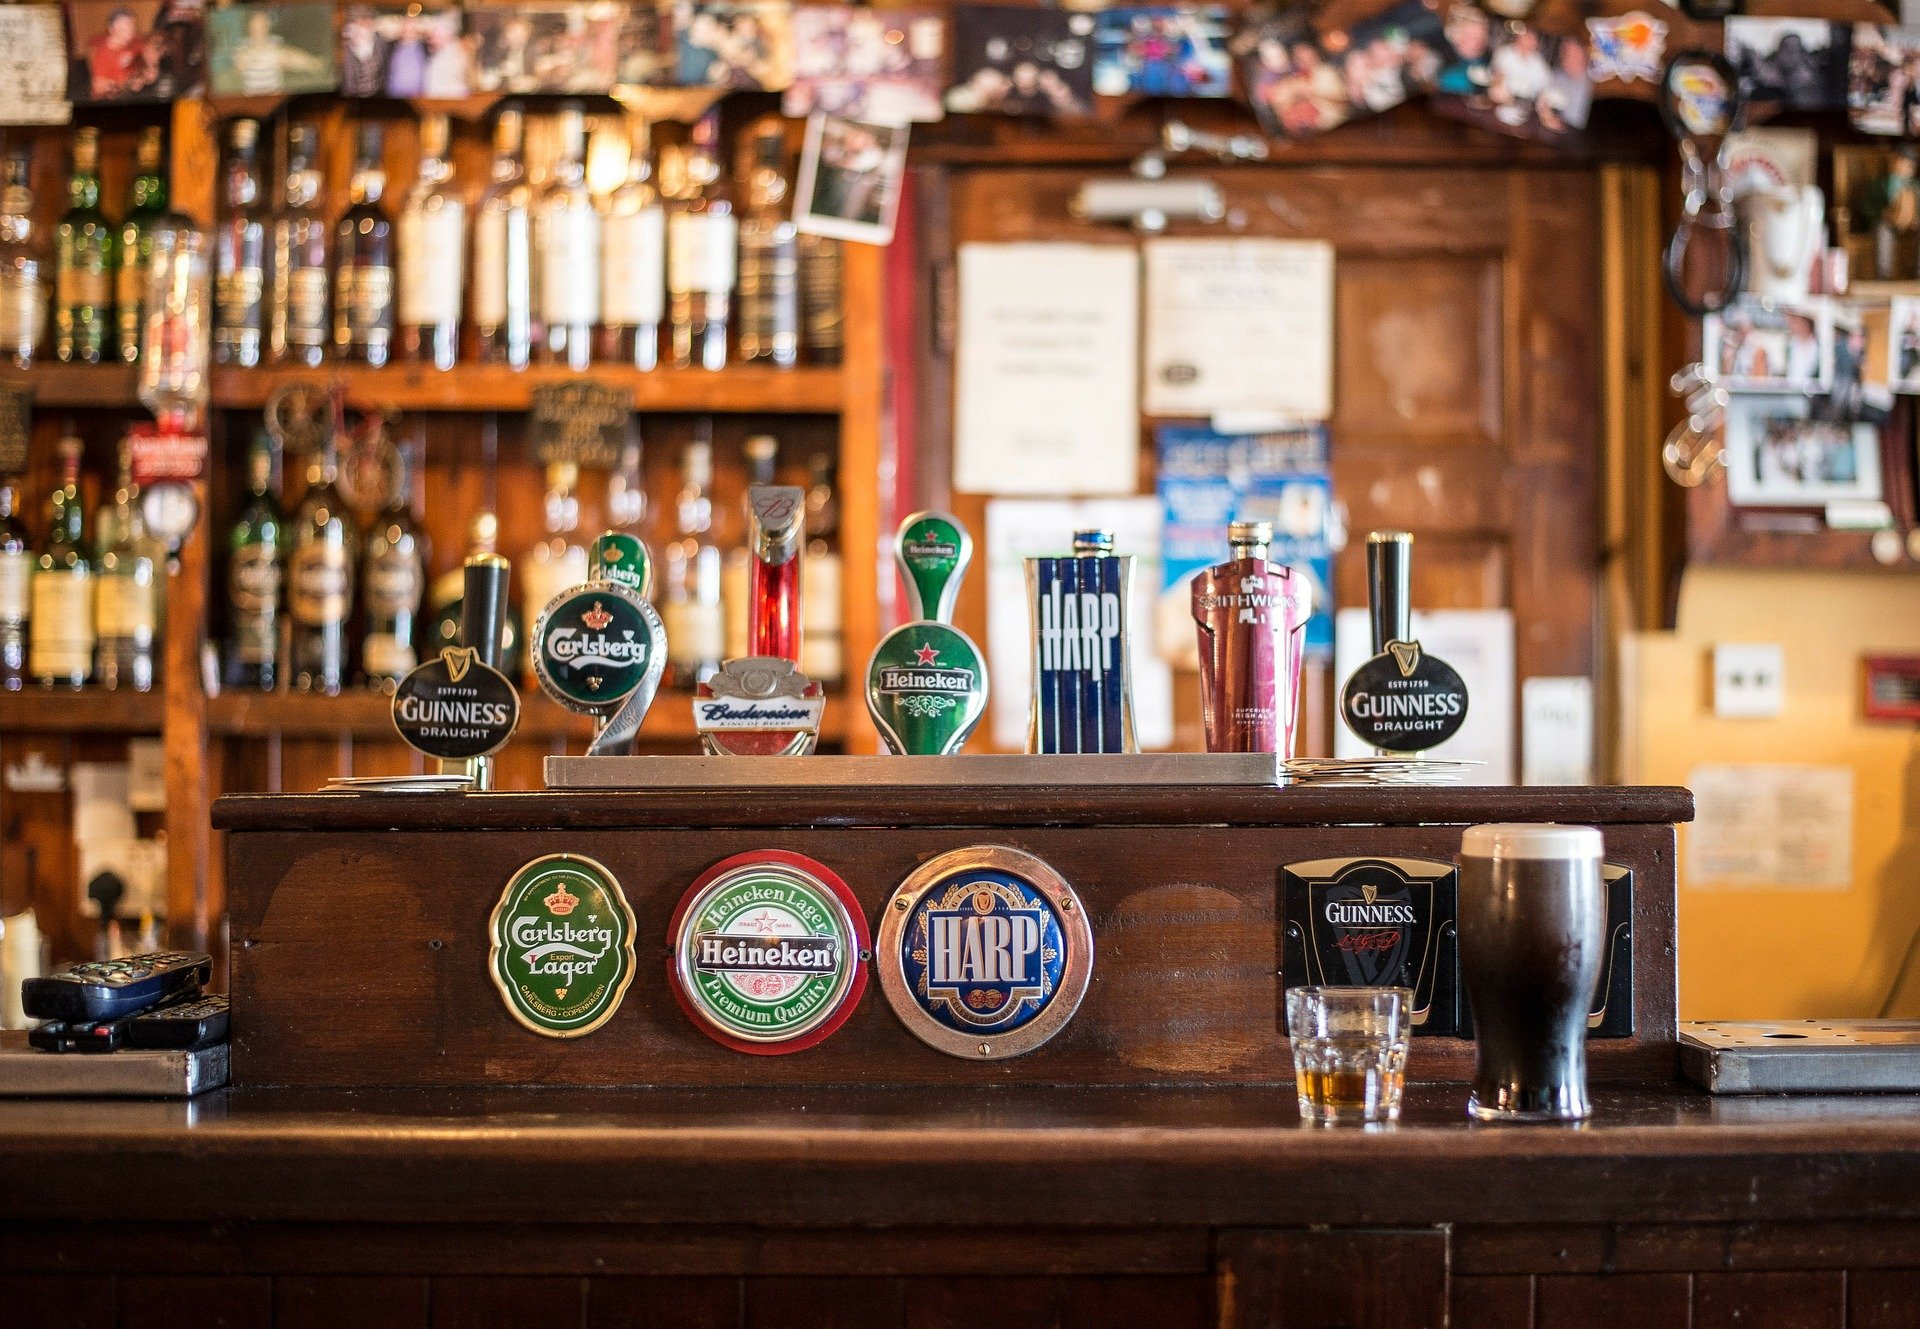 An Irish bar set-up with some beers on tap | Photo: Pixabay/Christian_Birkholz